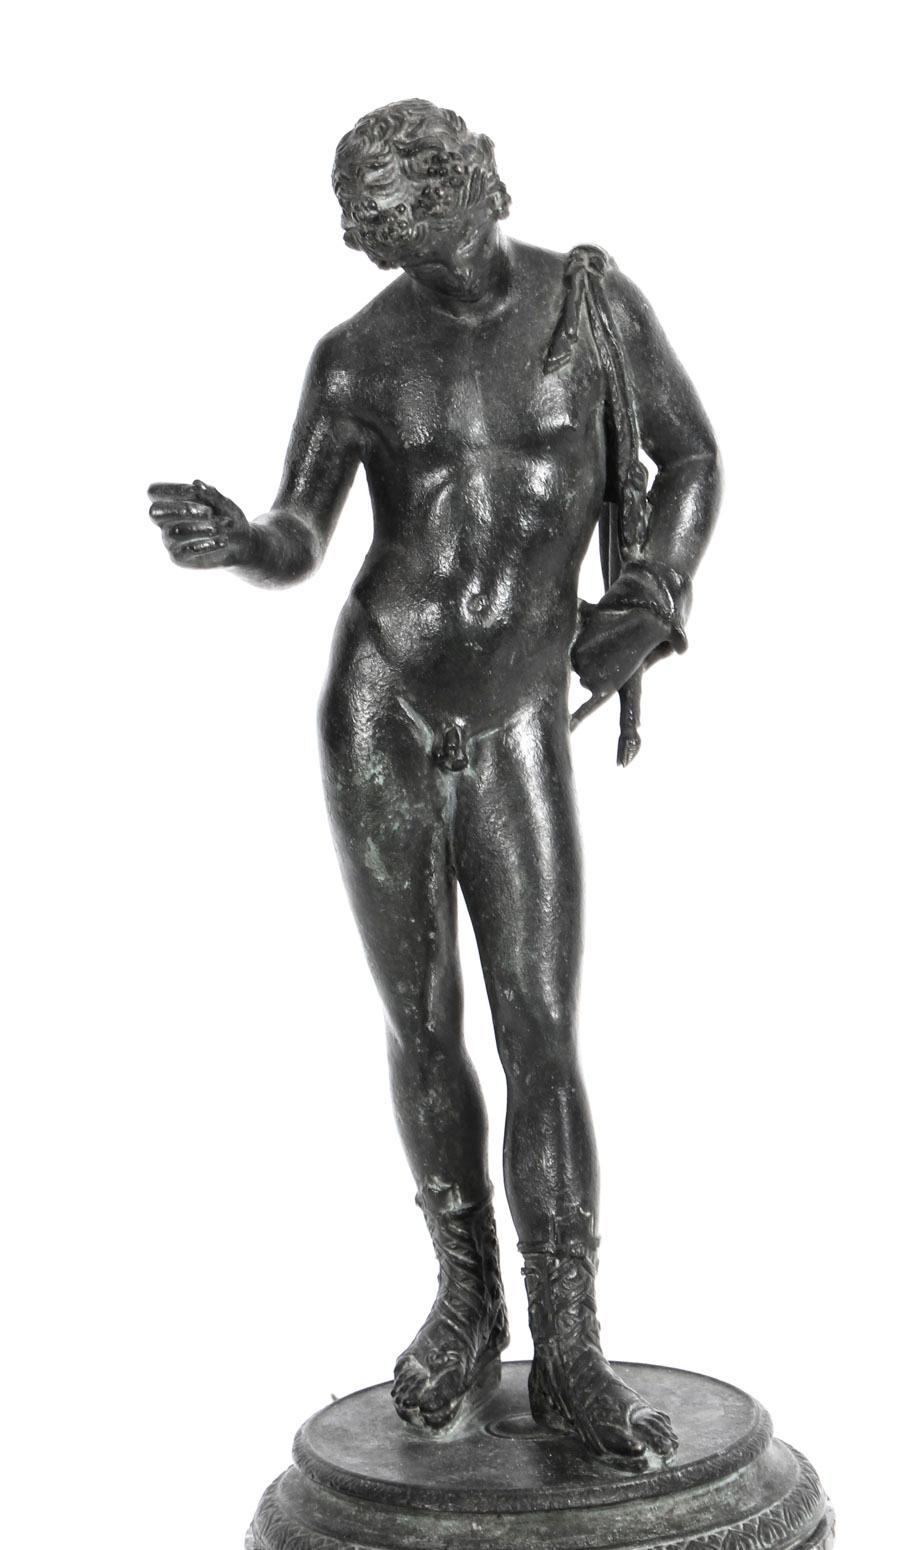 This is a superb antique Grand Tour patinated bronze figure of Narcissus, dating from the last quarter of the 19th Century.

Narcissus was a hunter in Greek mythology and he was distinguished for his beauty.
 
This stunning patinated bronze